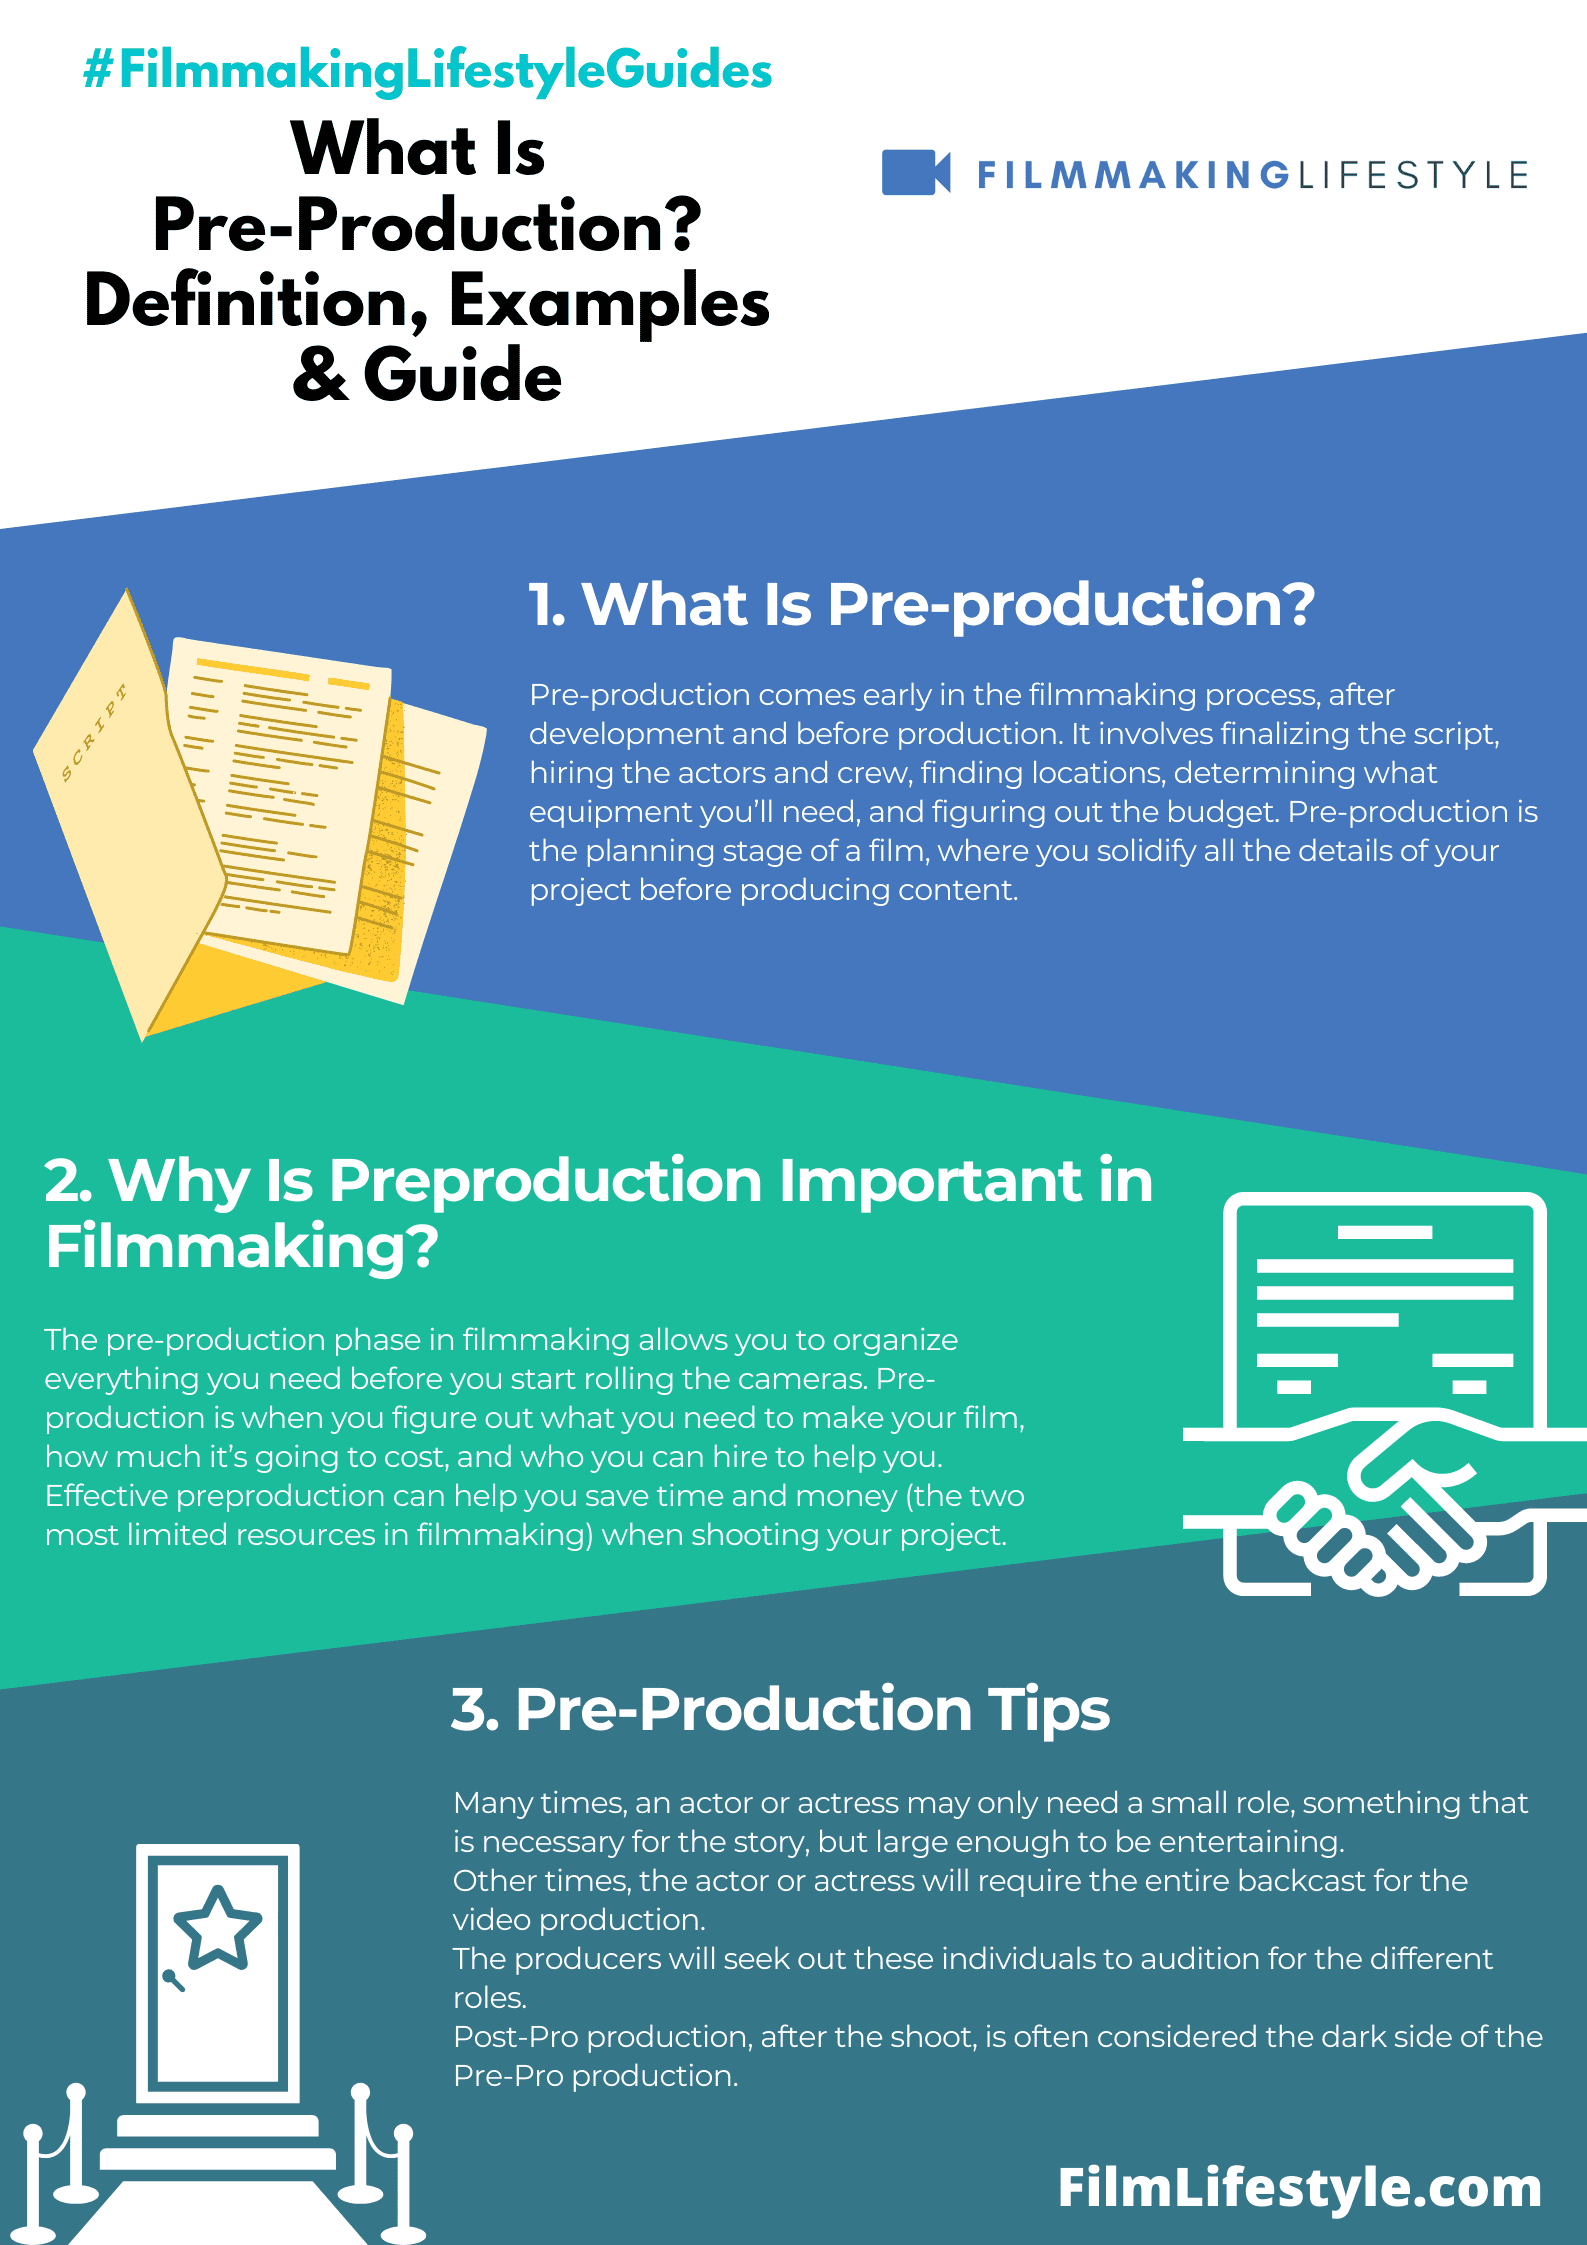 What Is Pre-Production